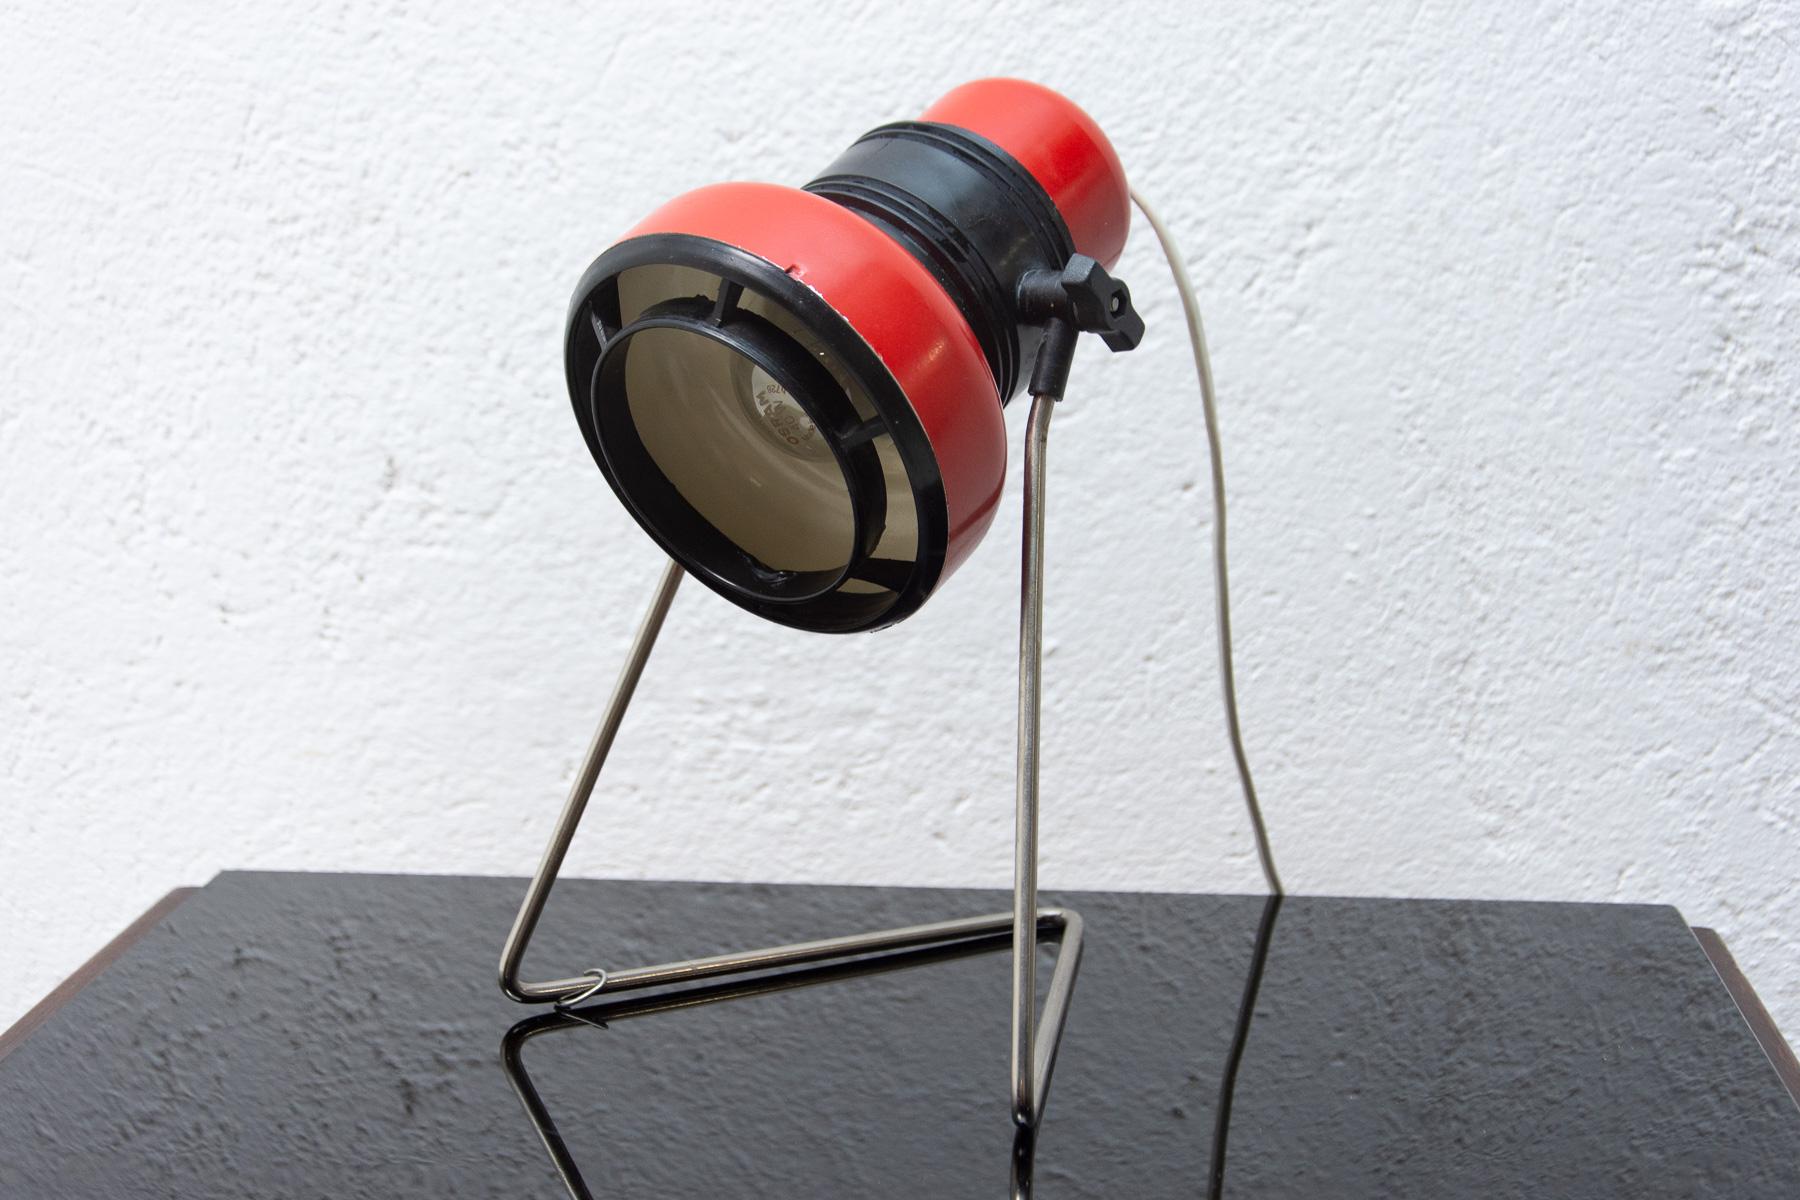 Small adjustable table or wall lamp, 1970´s, made in Hungaria. Chrome, enamel & plastic. In very good vintage condition.

Measures: Height: 27 cm

Width: 19 cm

Depth: 19 cm.